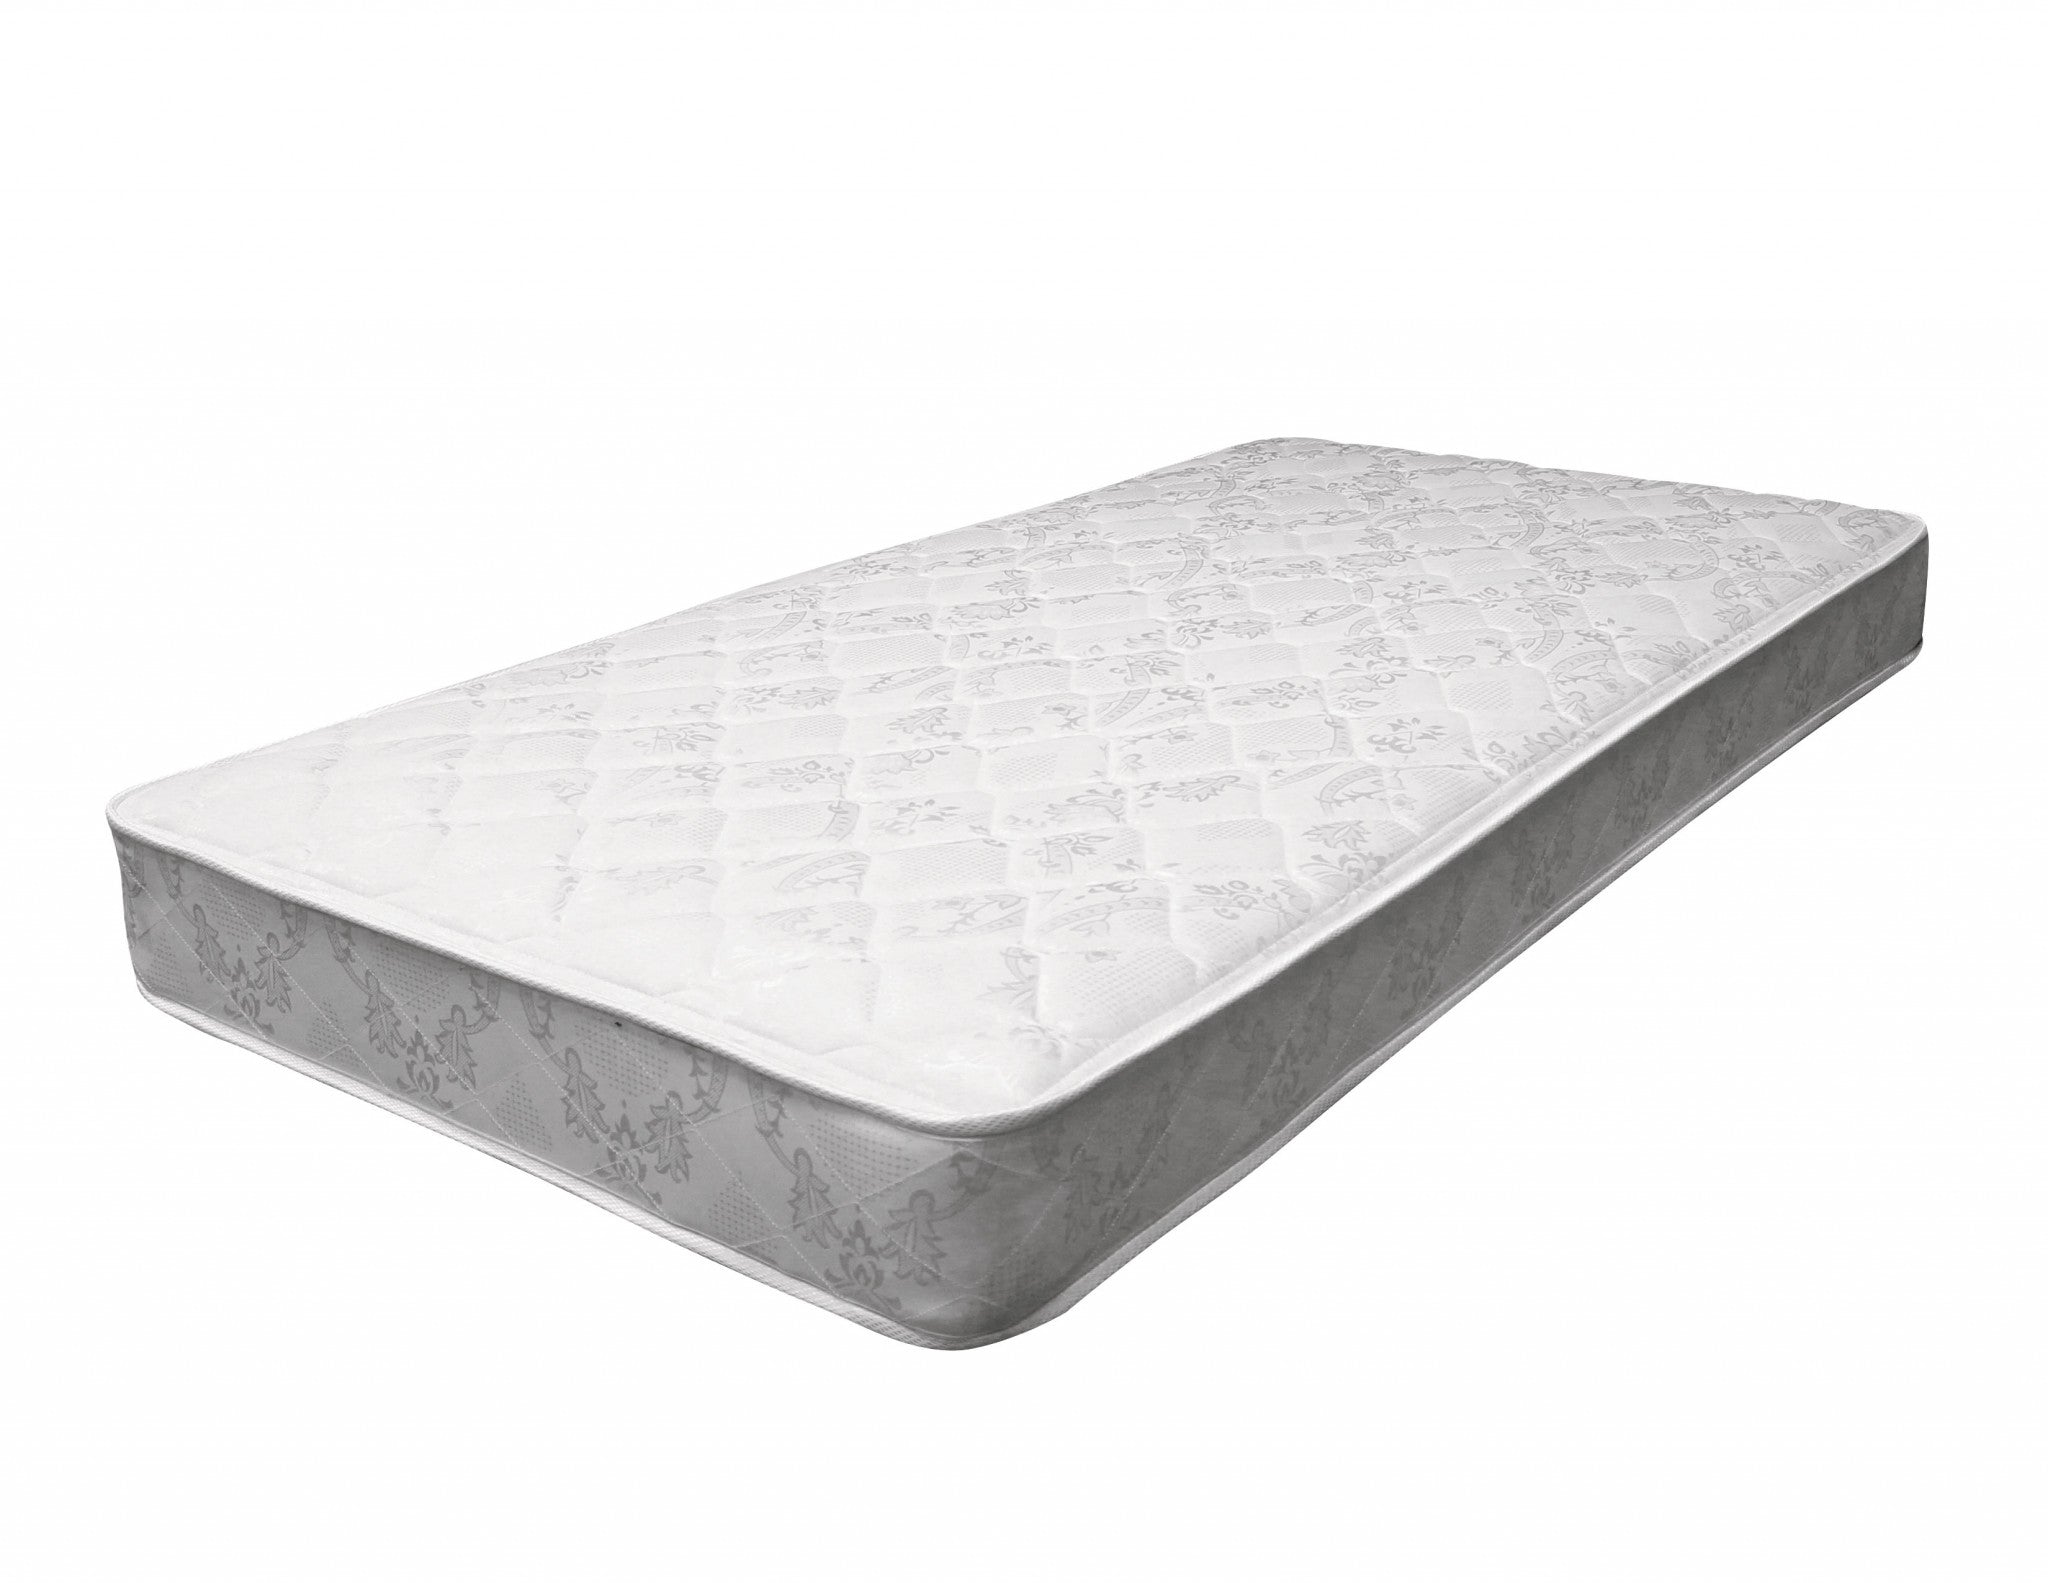 75" X 54" X 6" Full White And Gray Fabric Mattress Default Title